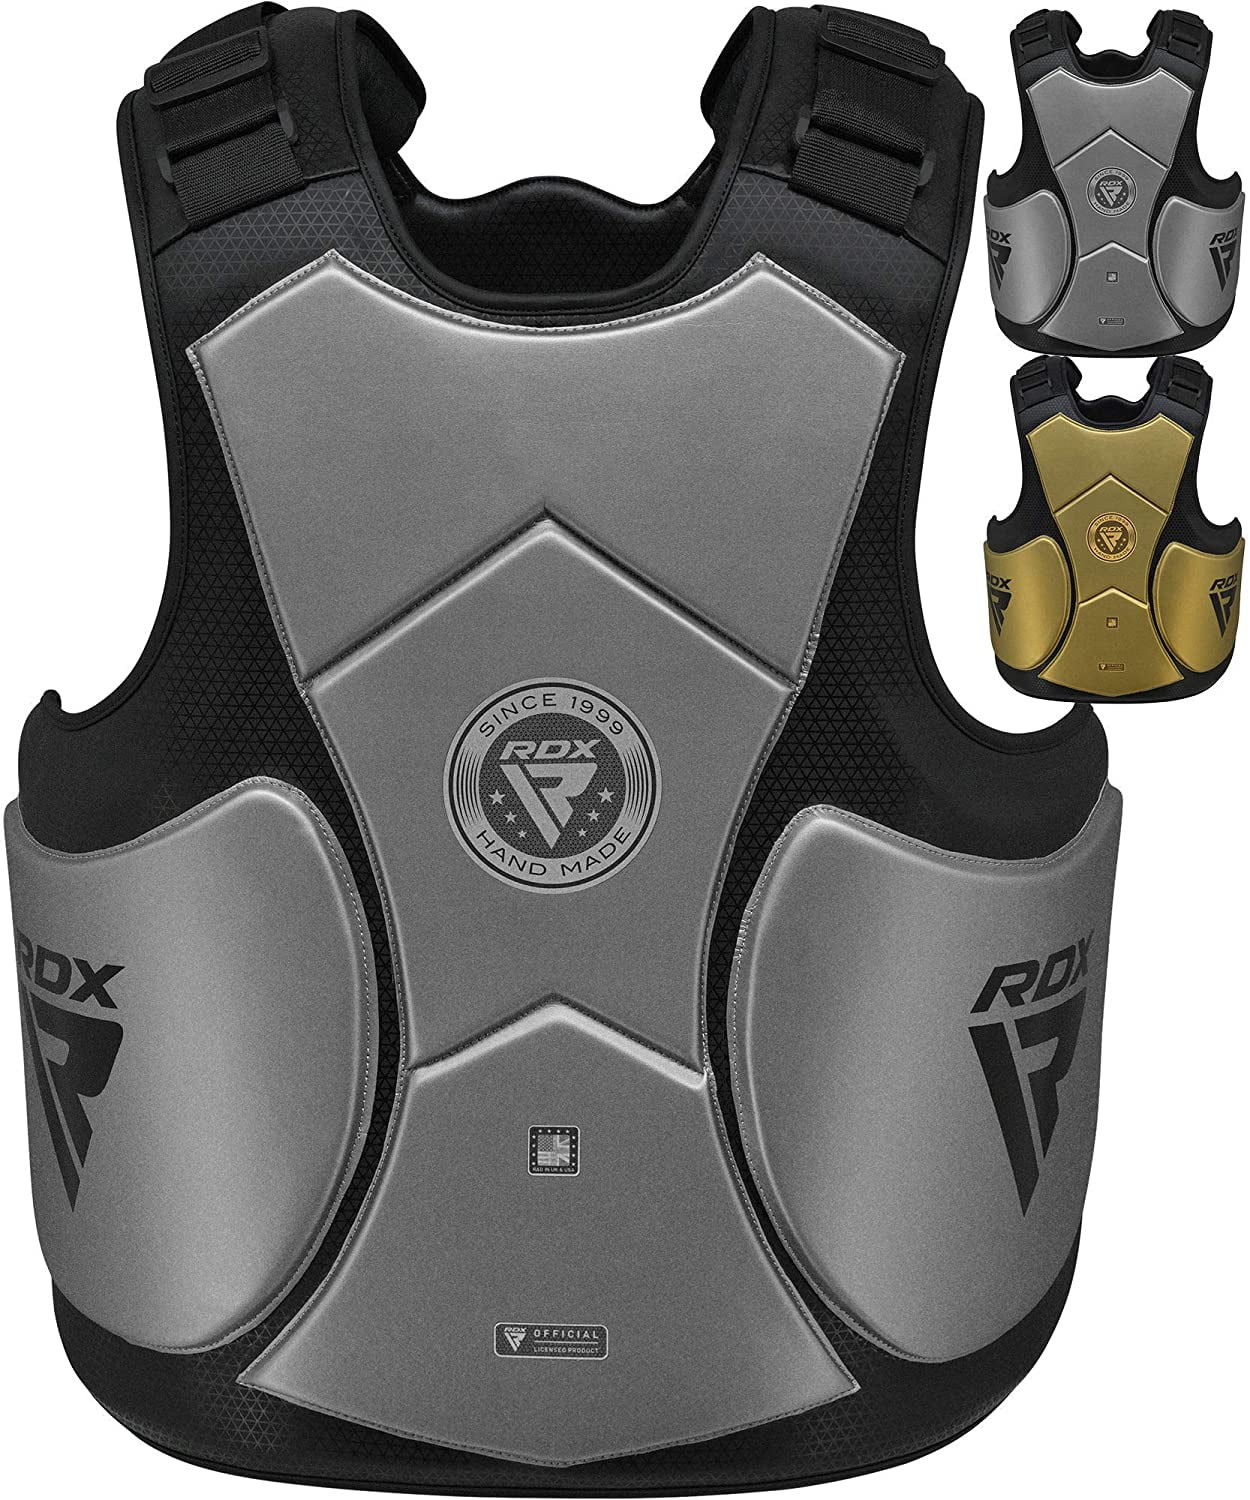 RDX Chest Guard Boxing MMA Training Body Protector Muay Thai Martial Arts Armour 